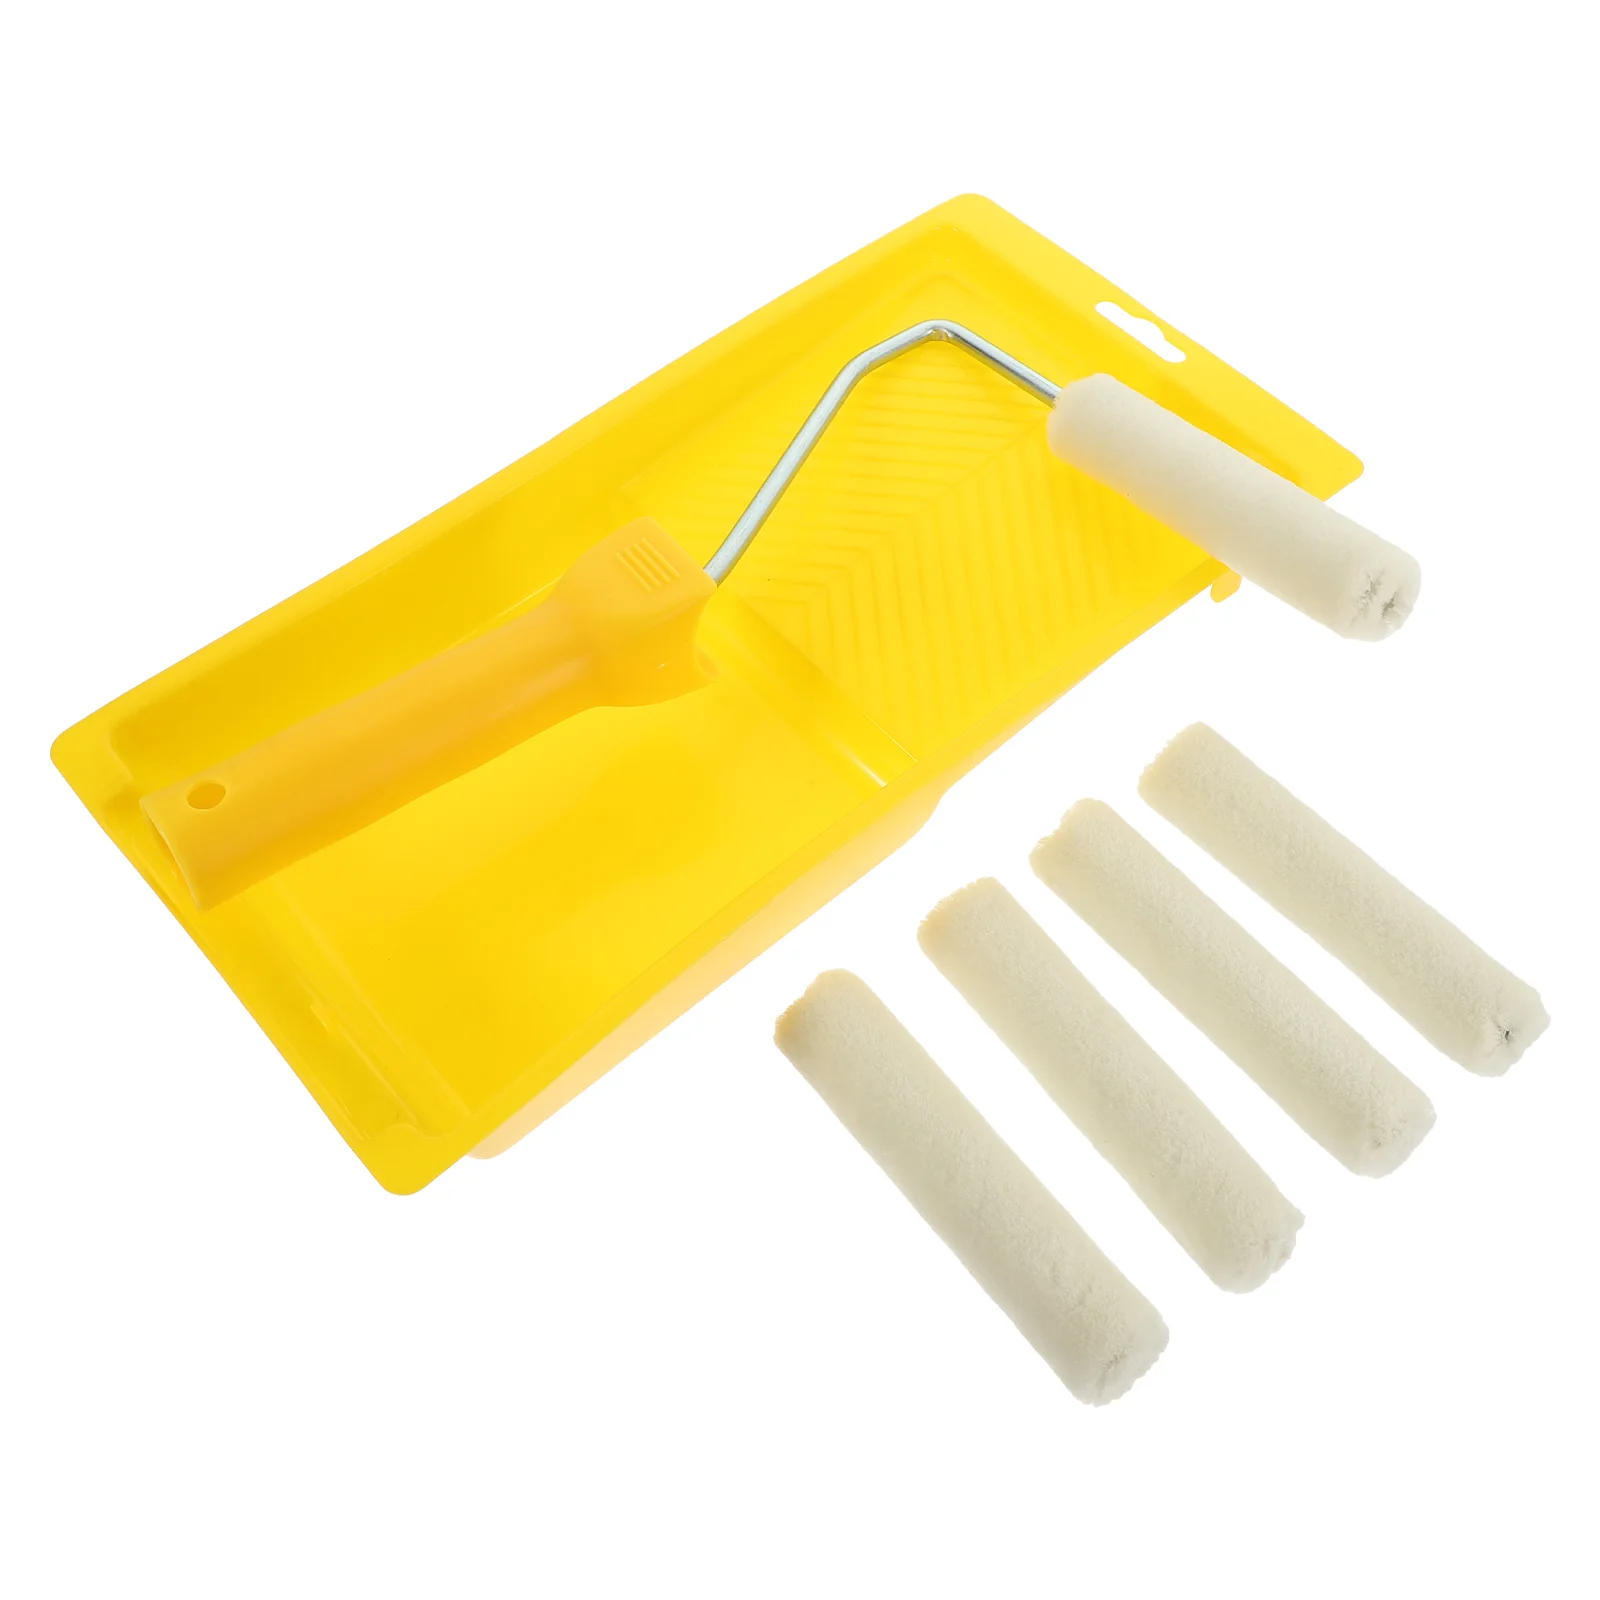 

4 Paint Roller House Painting Supplies Holder Rollers Walls Corner Kit Brackets